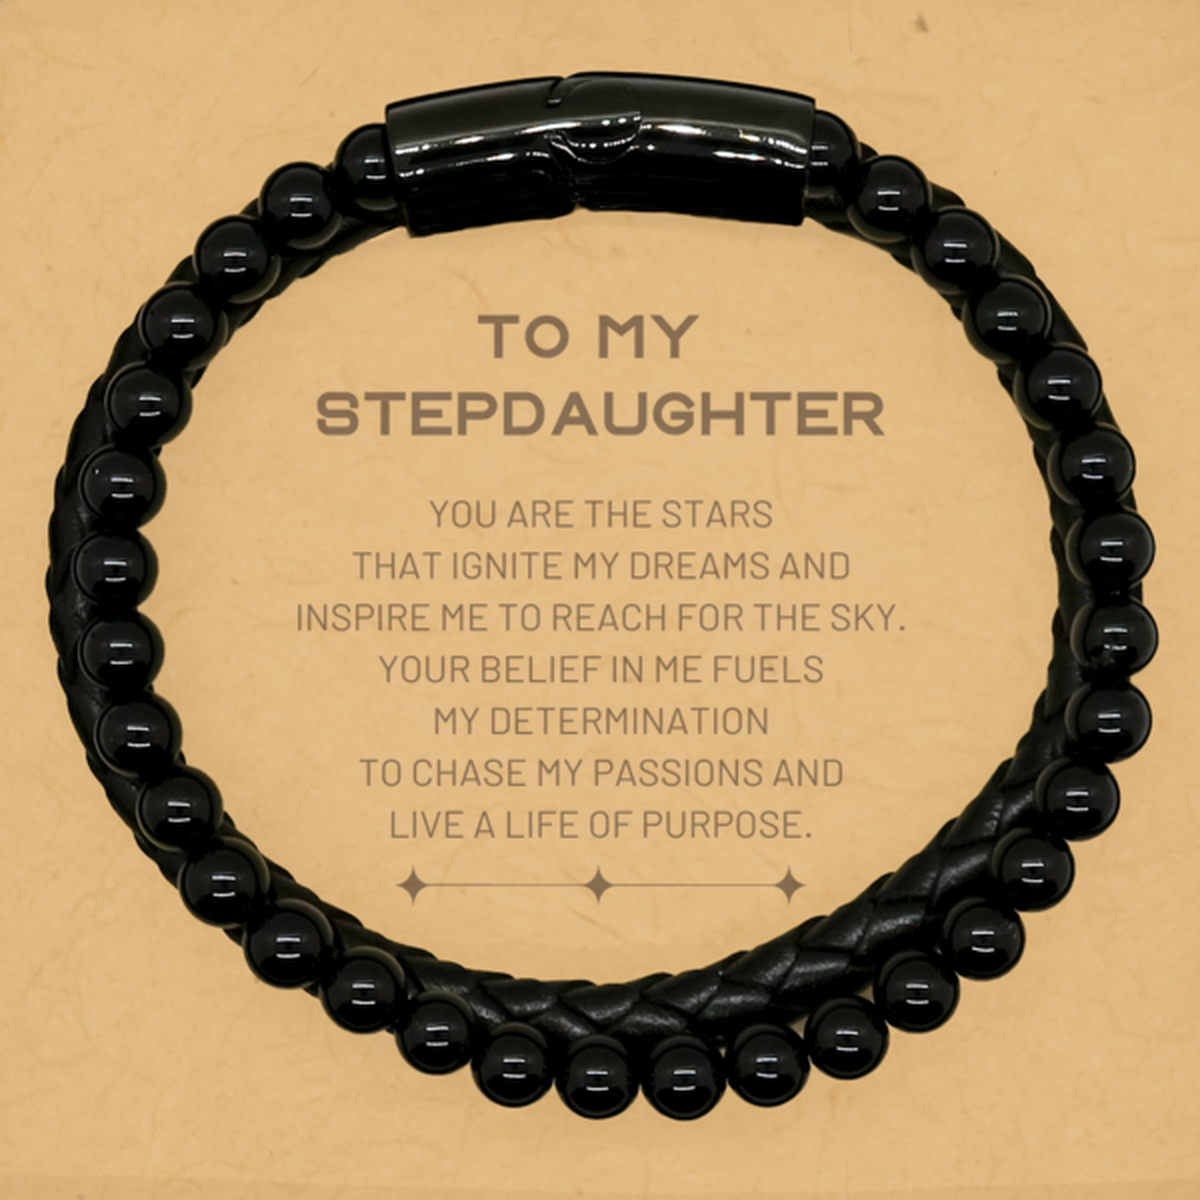 To My Stepdaughter Stone Leather Bracelets, You are the stars that ignite my dreams and inspire me to reach for the sky, Birthday Unique Gifts For Stepdaughter, Thank You Gifts For Stepdaughter